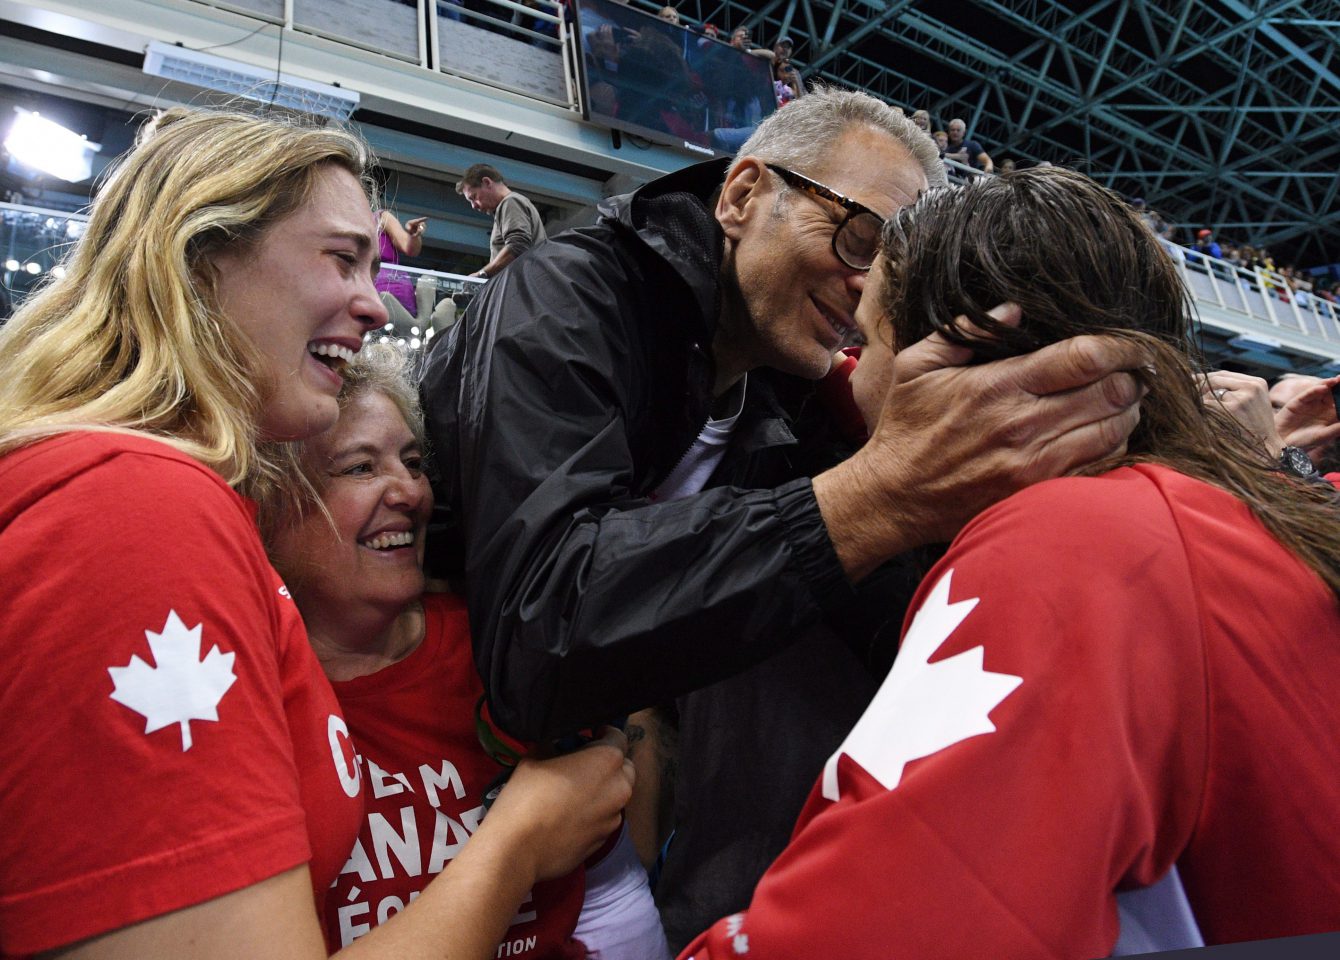 Canada's Penny Oleksiak, right, celebrates with a kiss from her father as her sister and mom look on following her gold-medal performance at the women's 100m freestyle finals during the 2016 Olympic Summer Games in Rio de Janeiro, Brazil, on Friday, Aug. 12, 2016. THE CANADIAN PRESS/Sean Kilpatrick